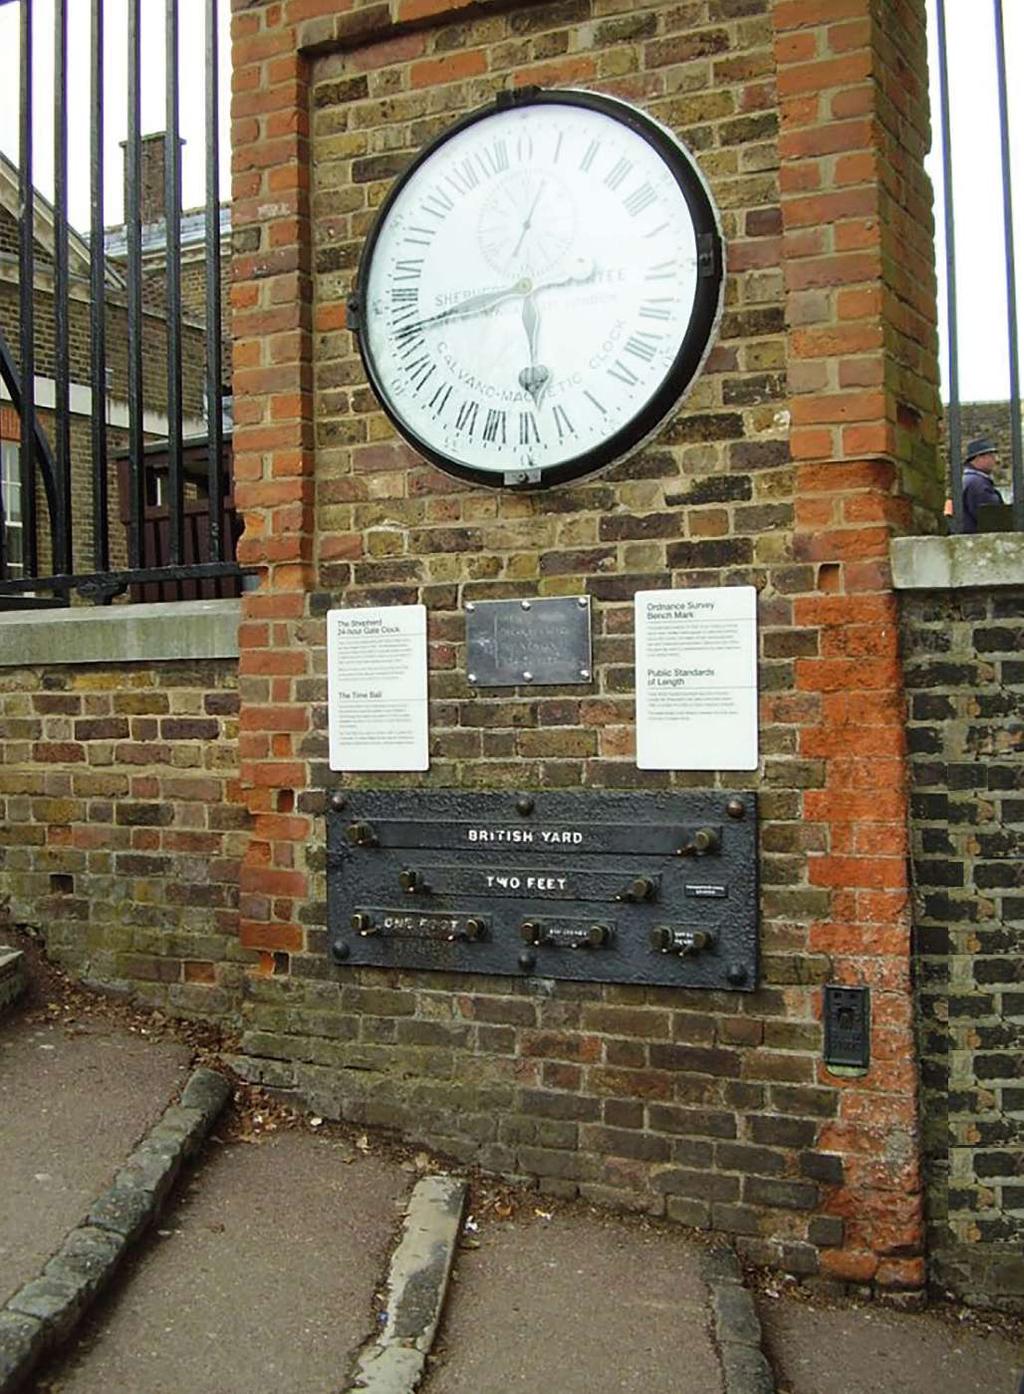 4 The Shepherd Gate Clock is mounted on the wall outside the gate of the Royal Greenwich Observatory in Greenwich, Greater London.